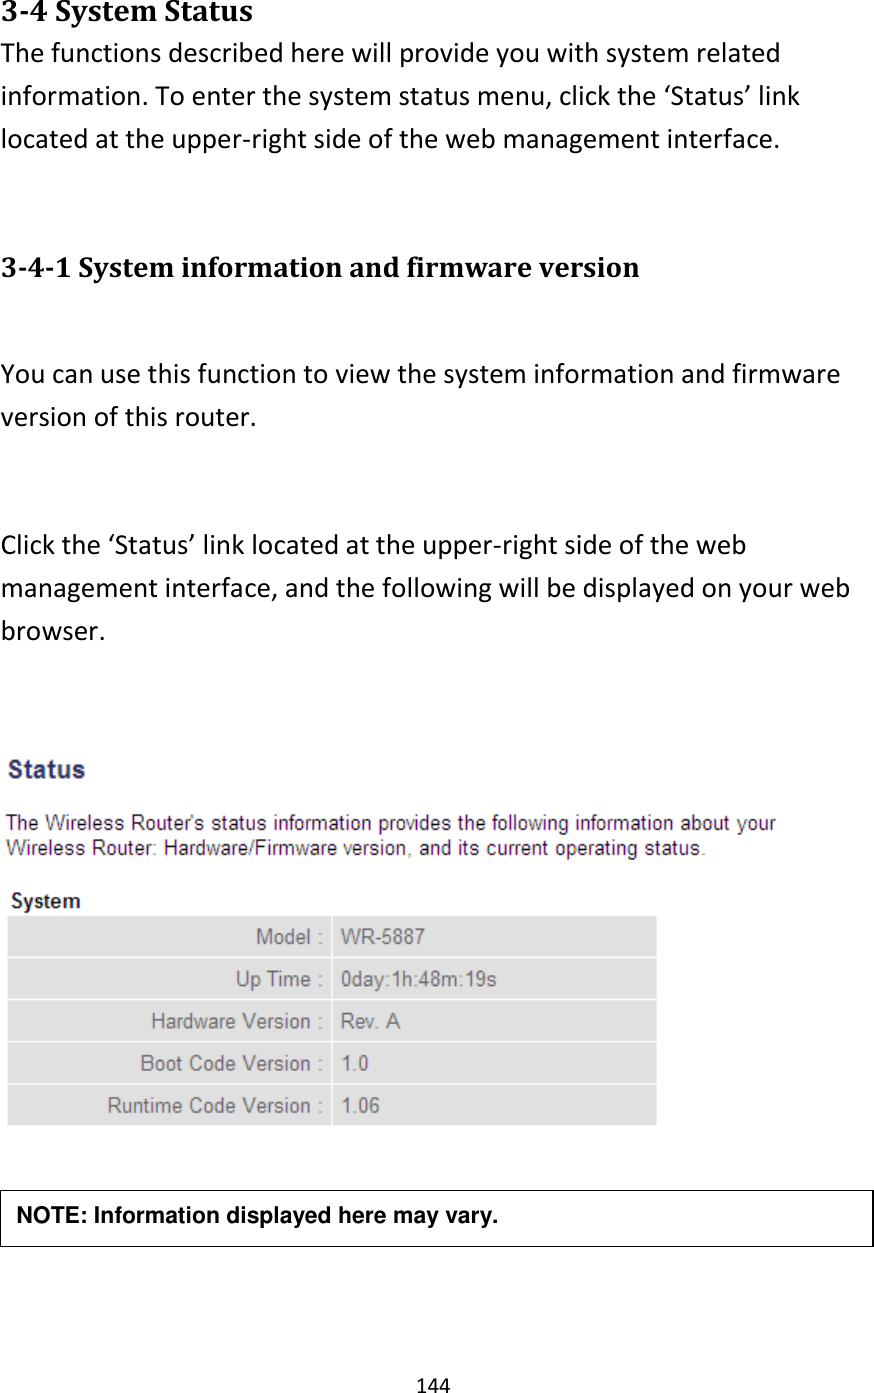 144  3-4 System Status The functions described here will provide you with system related information. To enter the system status menu, click the ‘Status’ link located at the upper-right side of the web management interface.  3-4-1 System information and firmware version  You can use this function to view the system information and firmware version of this router.  Click the ‘Status’ link located at the upper-right side of the web management interface, and the following will be displayed on your web browser.      NOTE: Information displayed here may vary. 